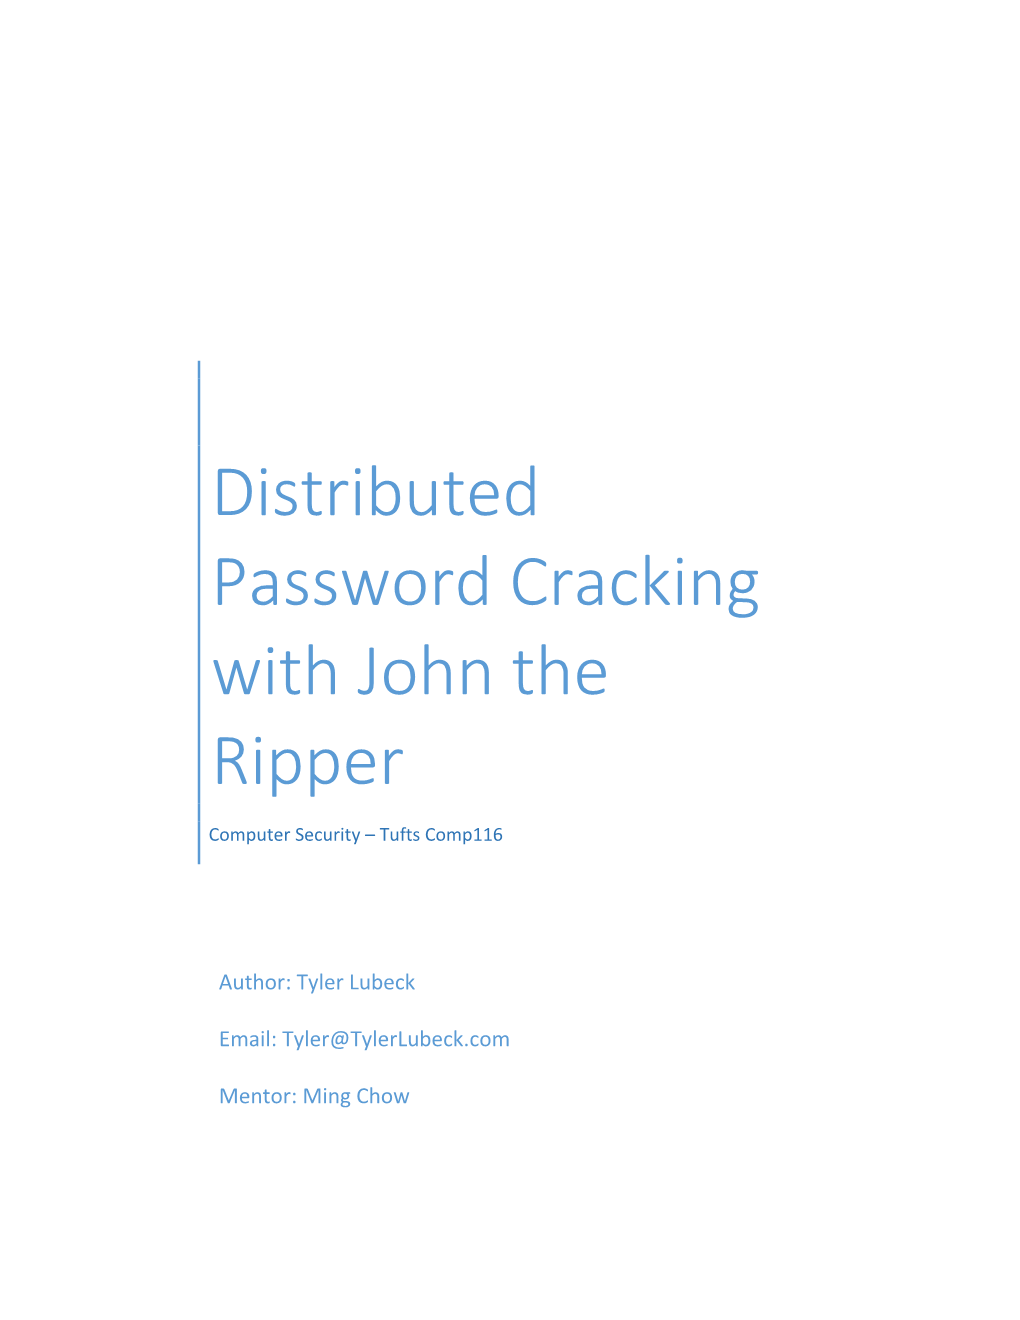 Distributed Password Cracking with John the Ripper